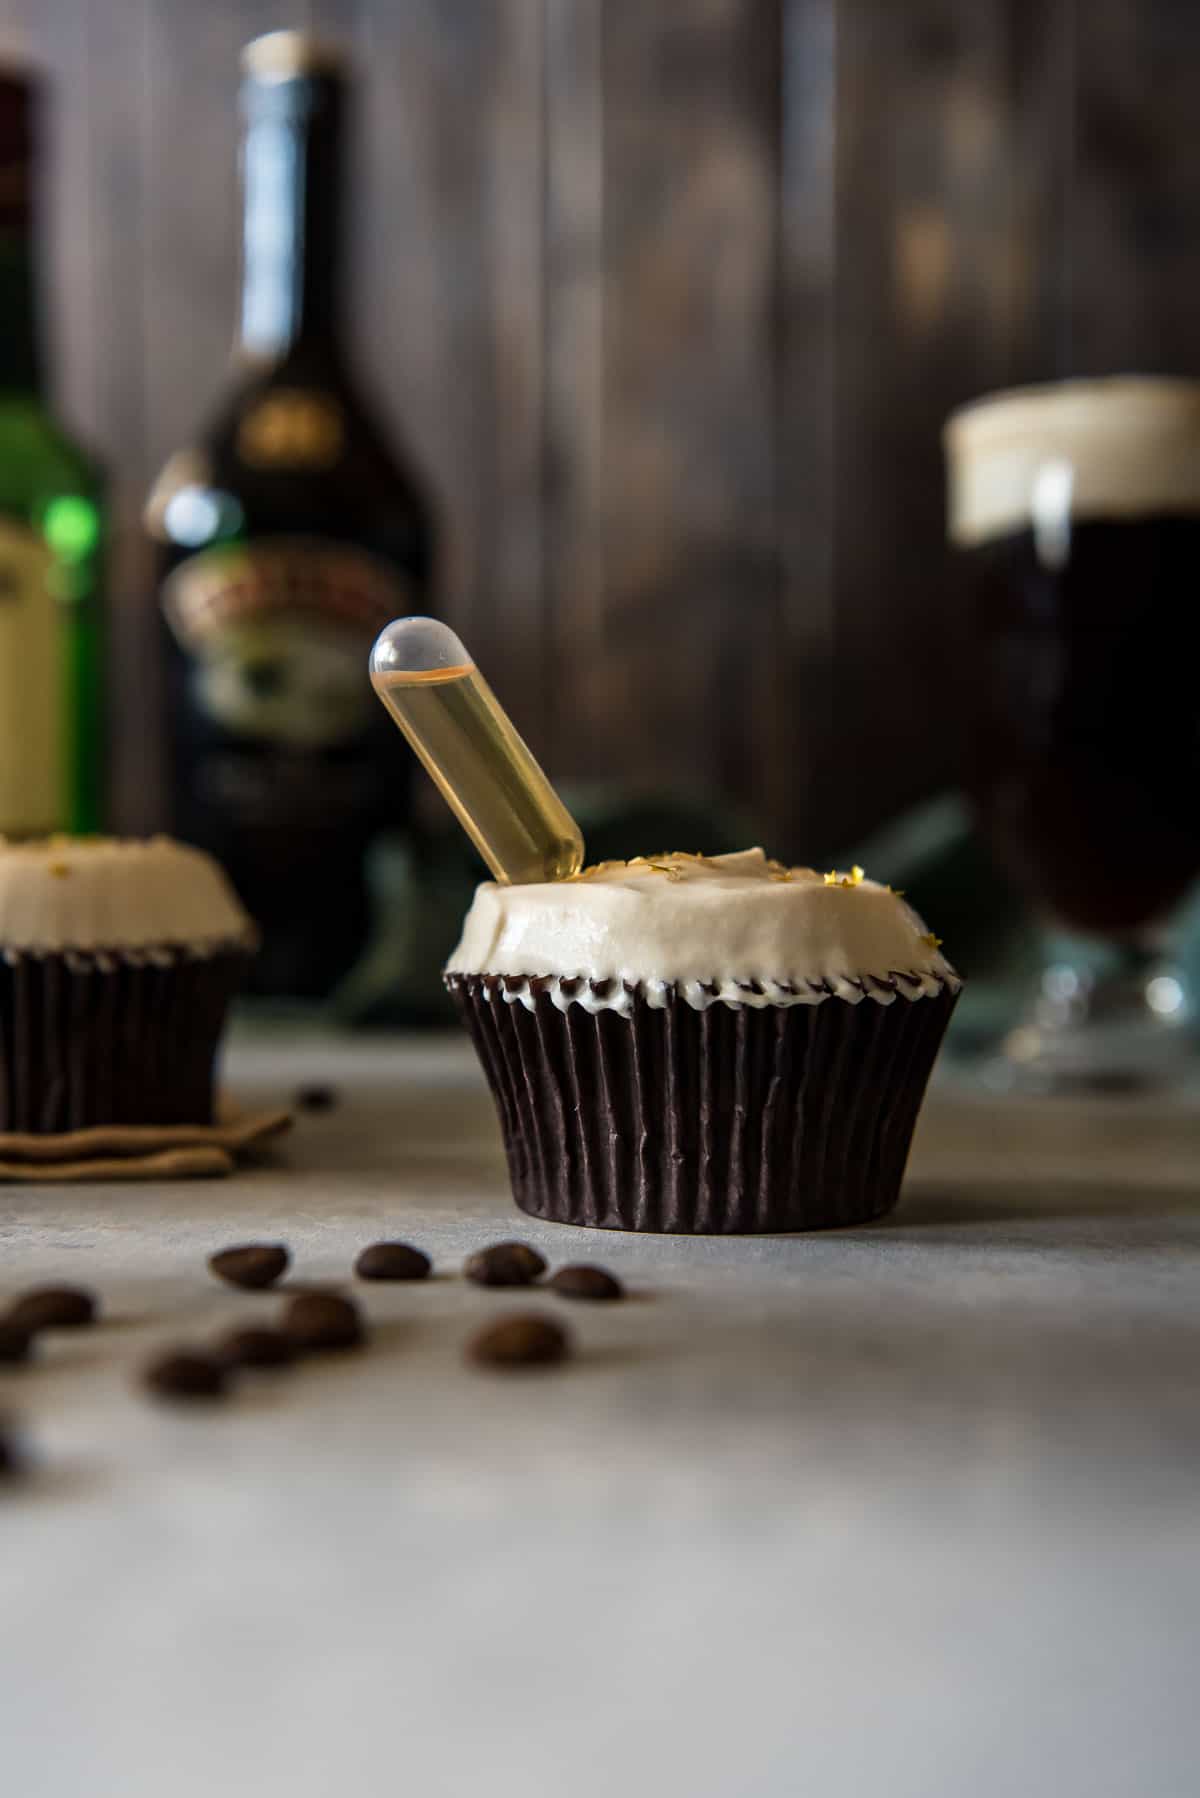 Irish coffee cupcakes with a bottle of Baileys.